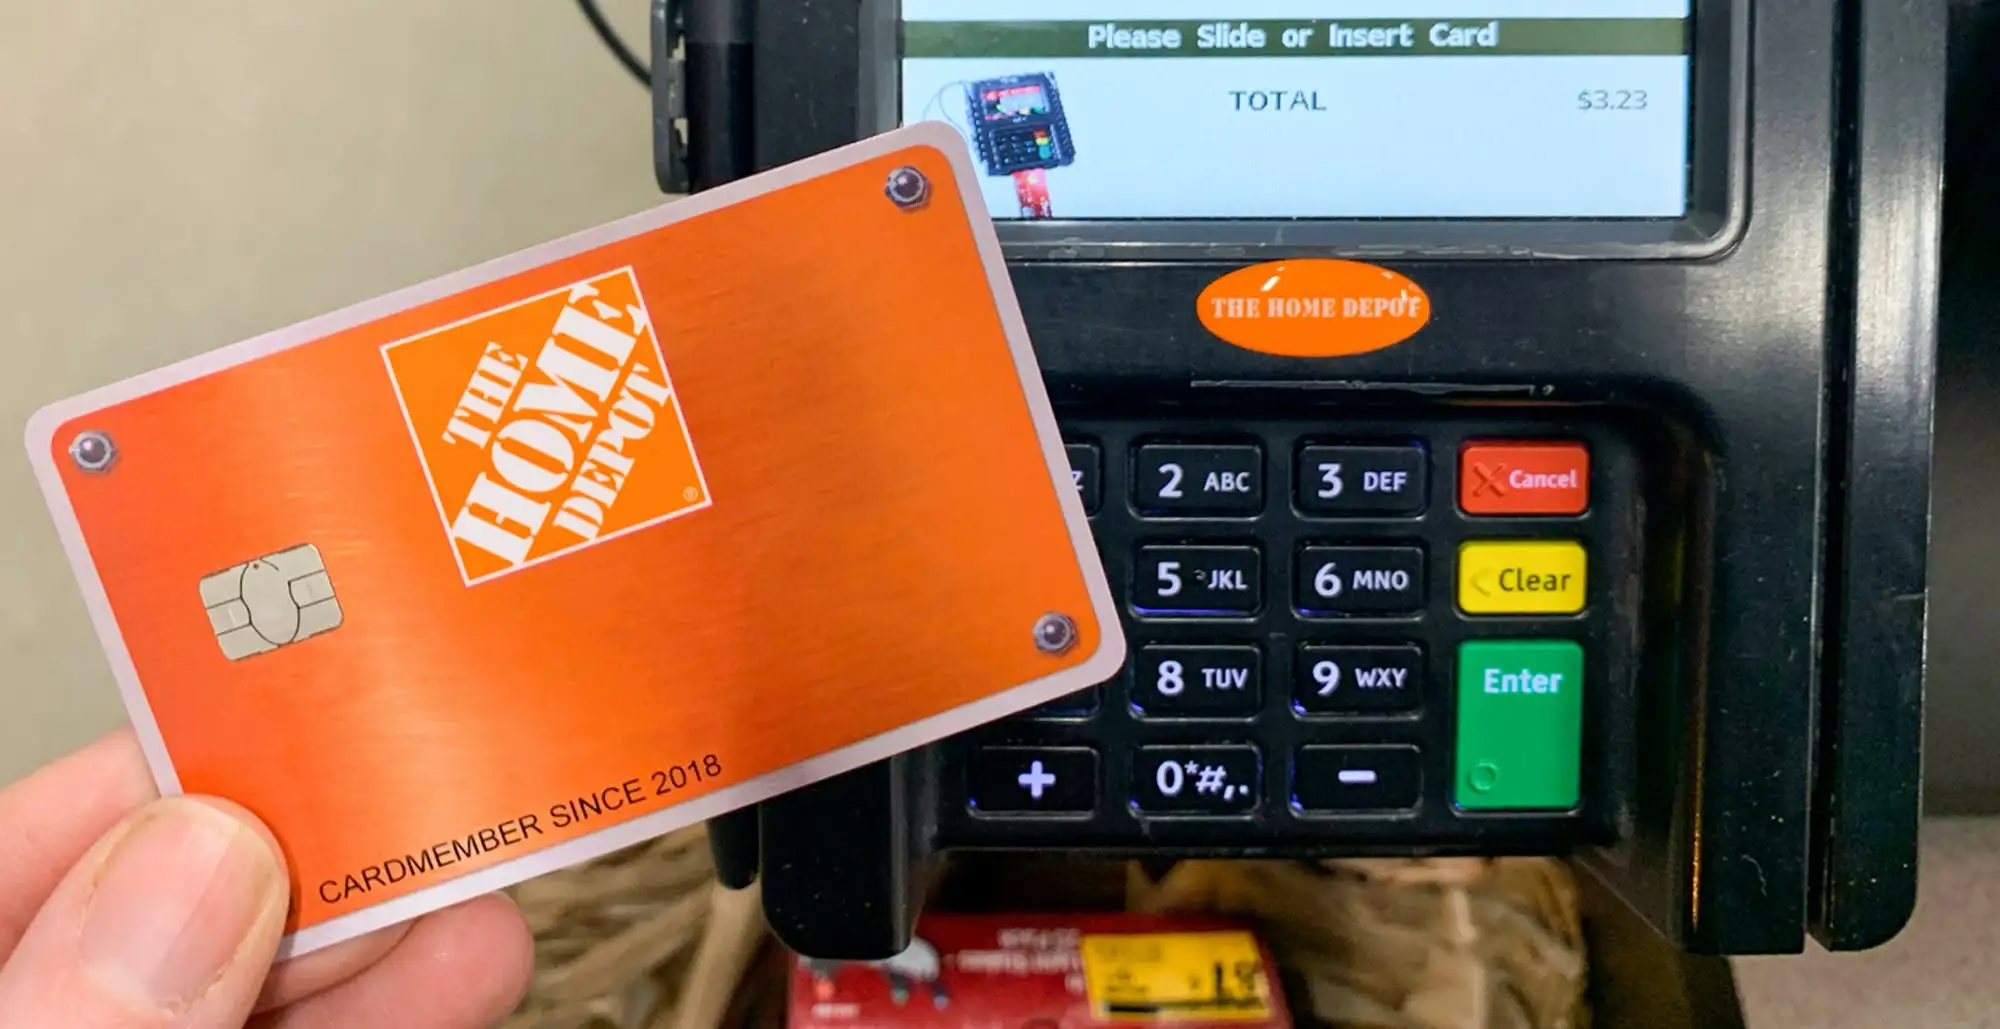 How To Cancel Home Depot Credit Card